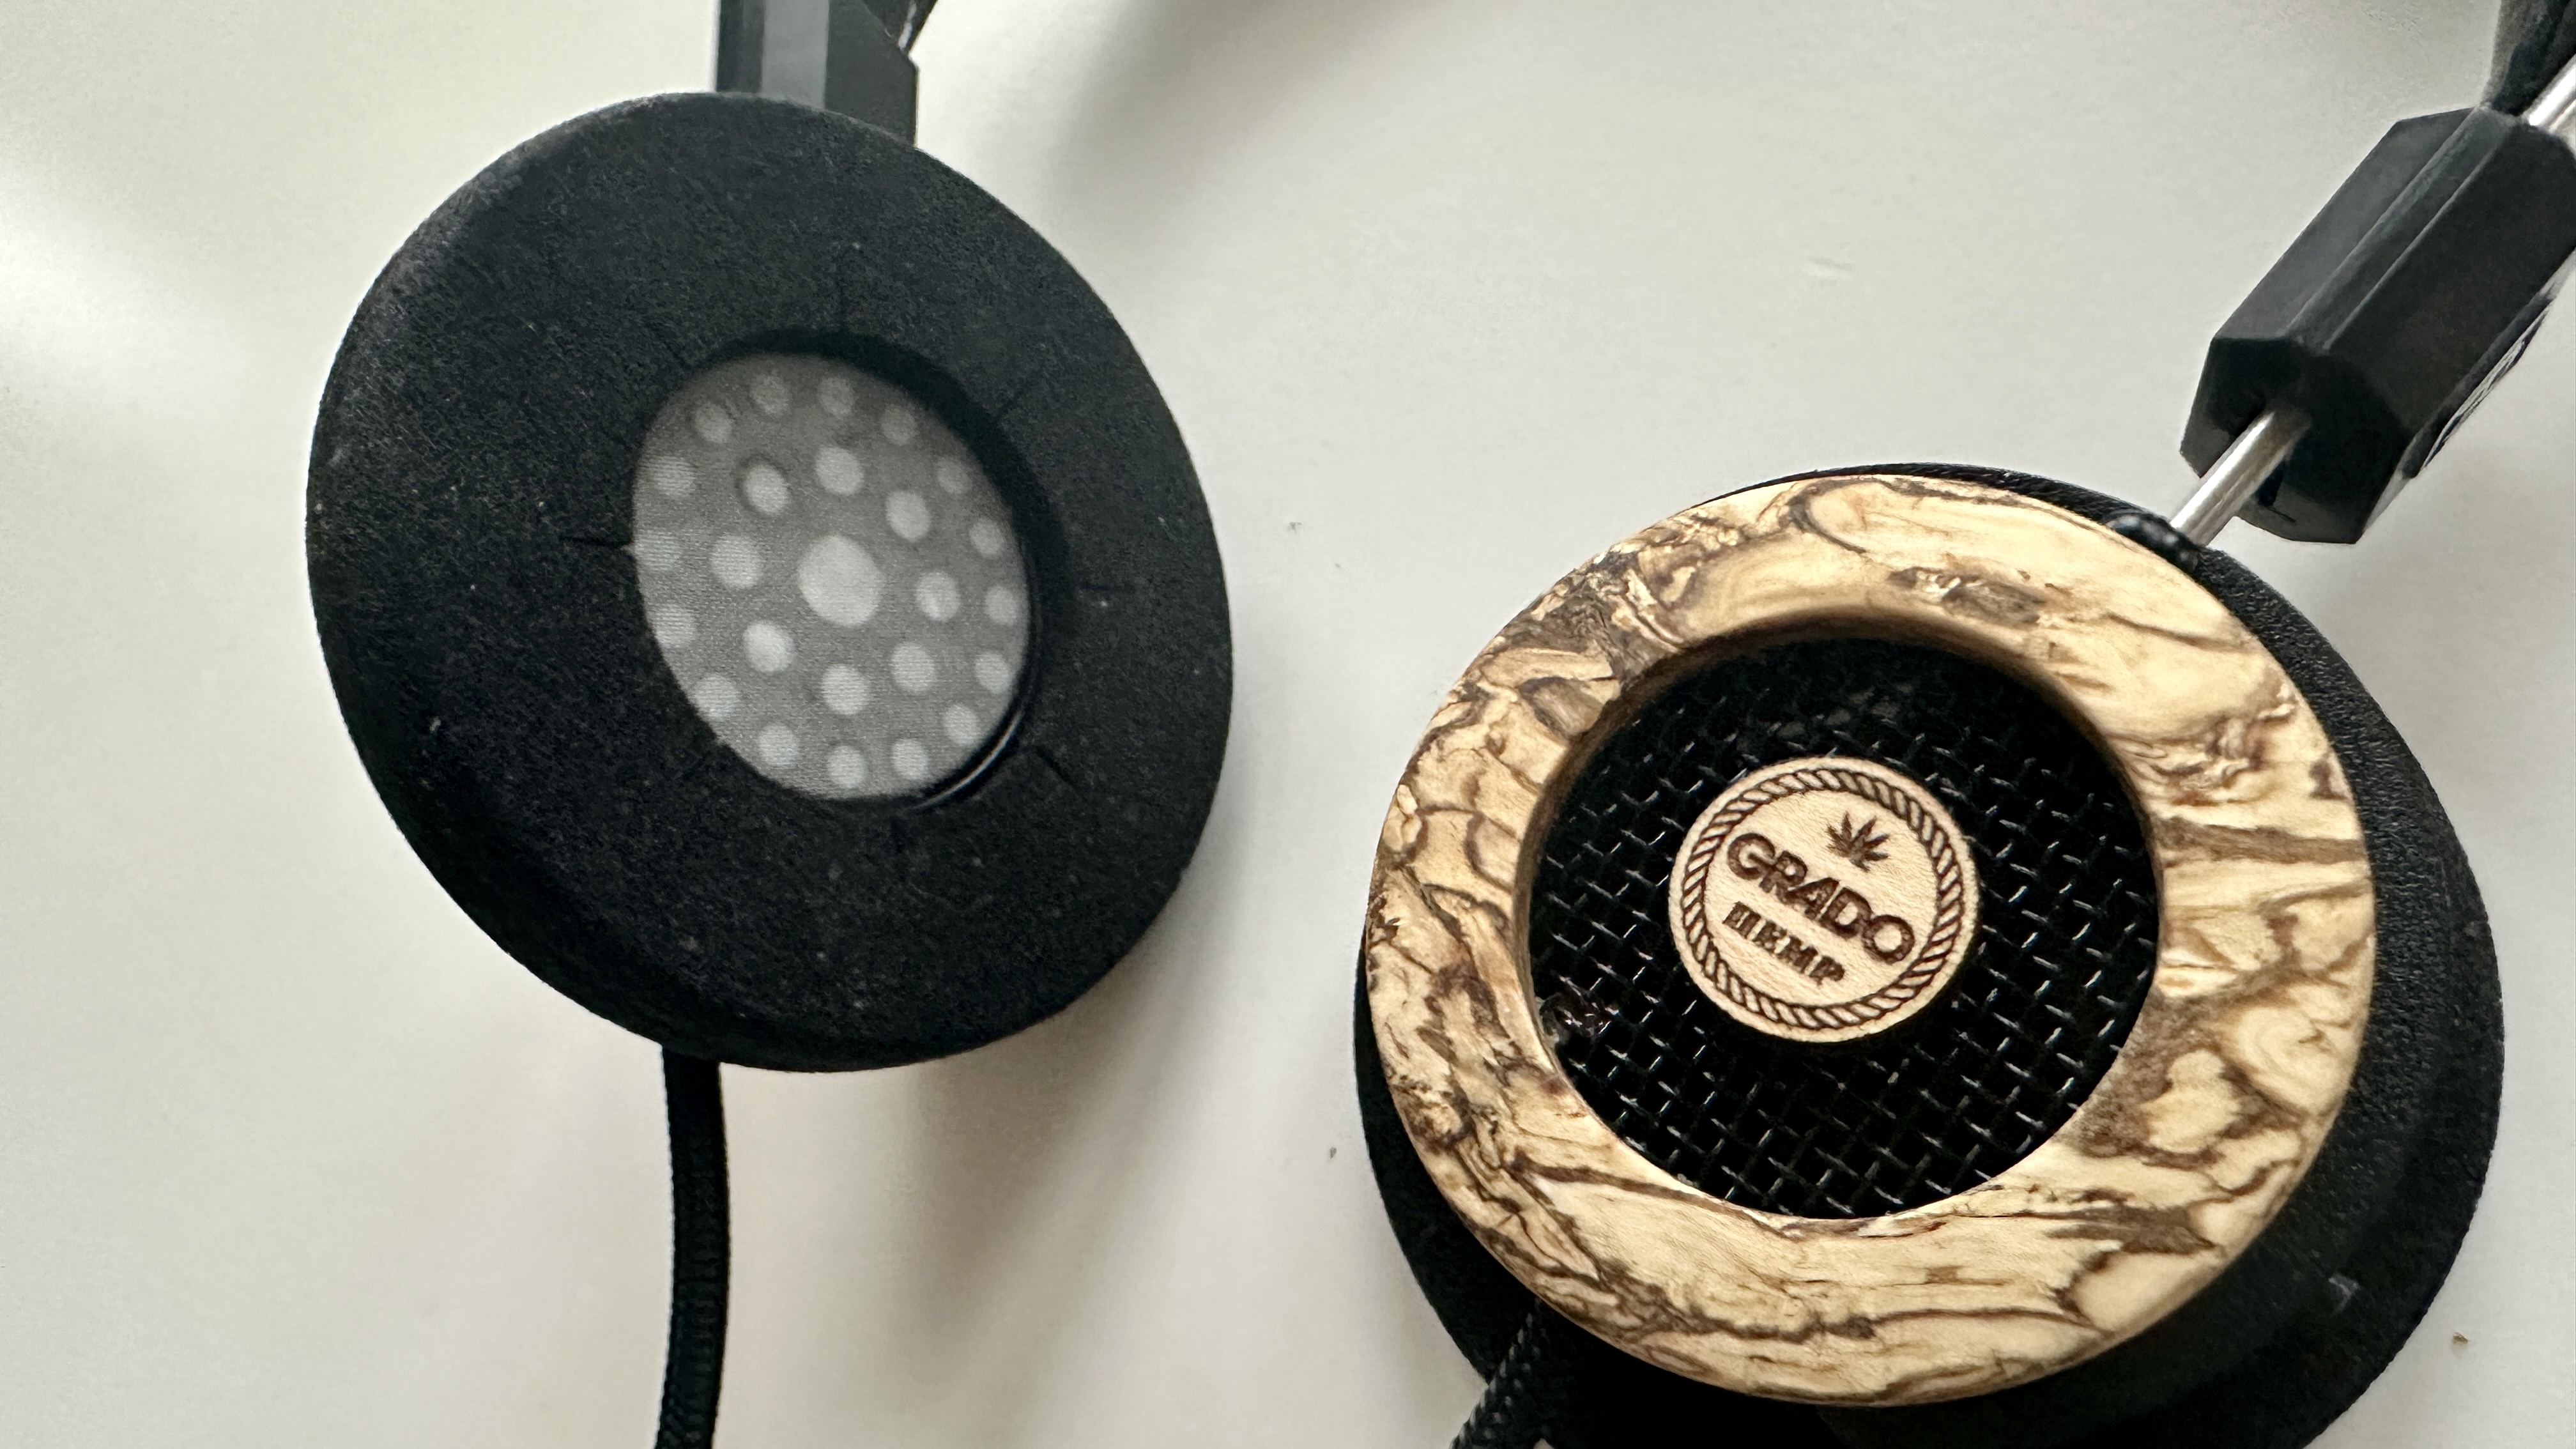 Grado Hemp headphones with one cup rotated to the front and one to the back, to showcase their open-backed nature